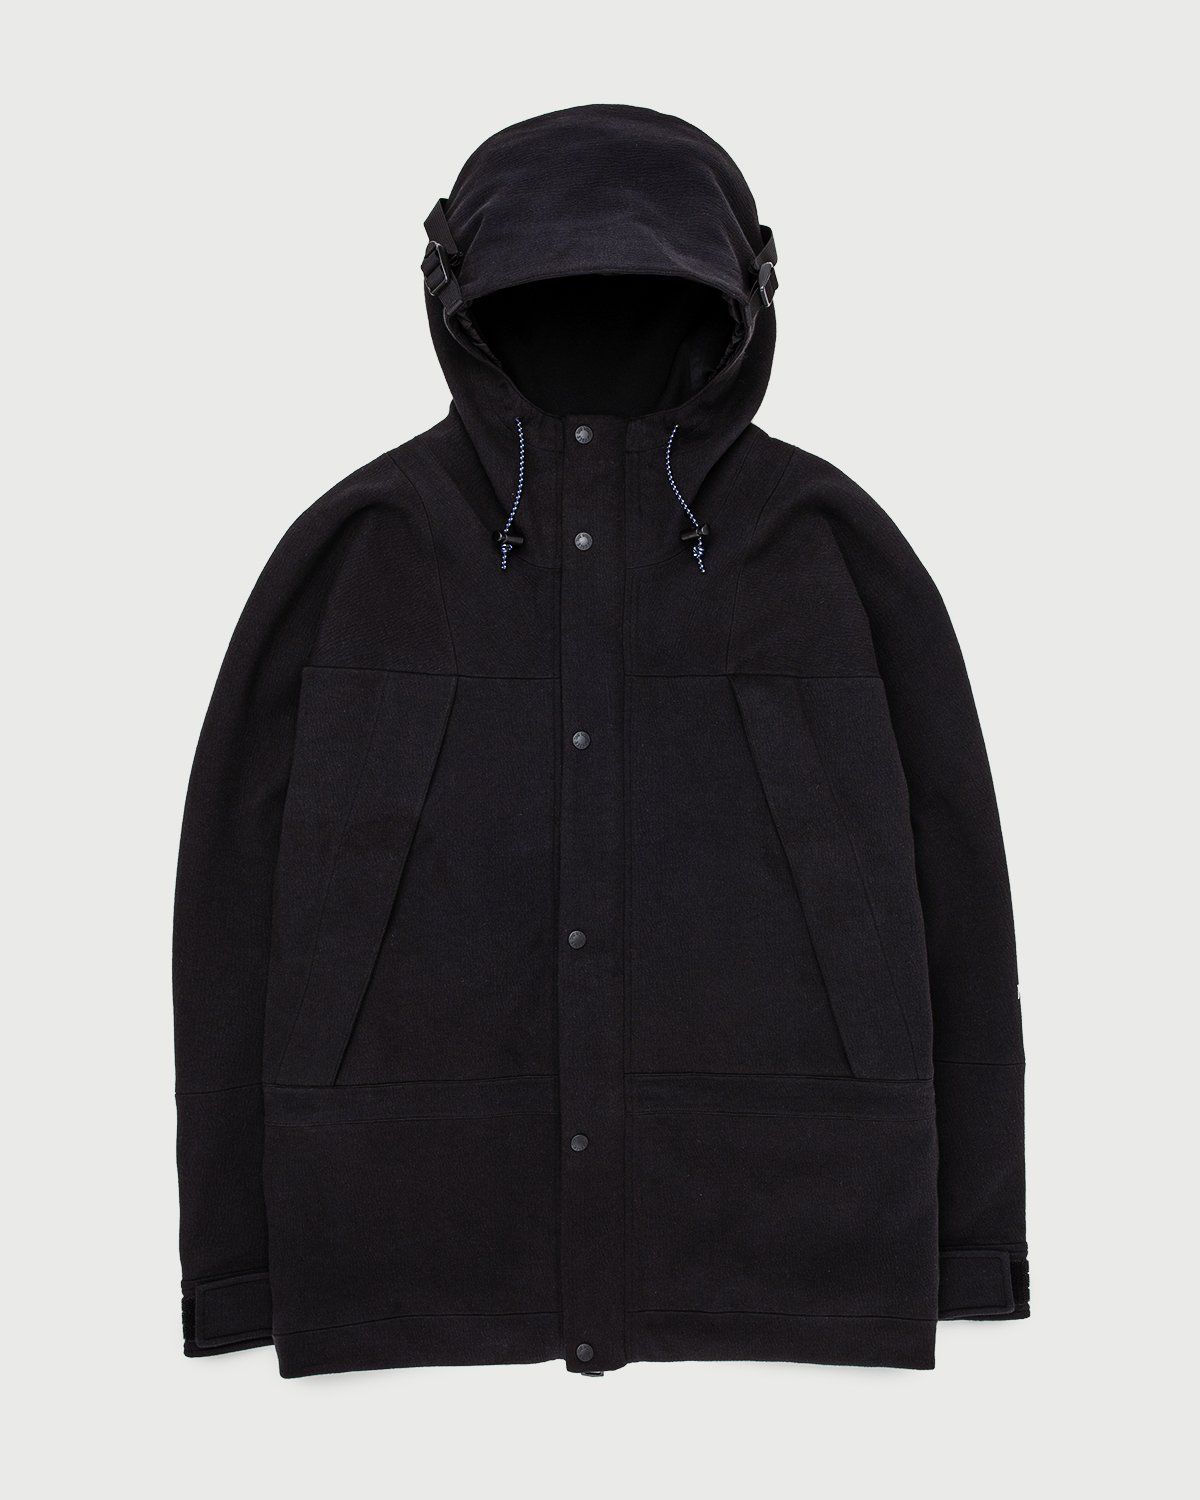 The North Face – Black Series Spacer Knit Mountain Light Jacket Black - Outerwear - Black - Image 1